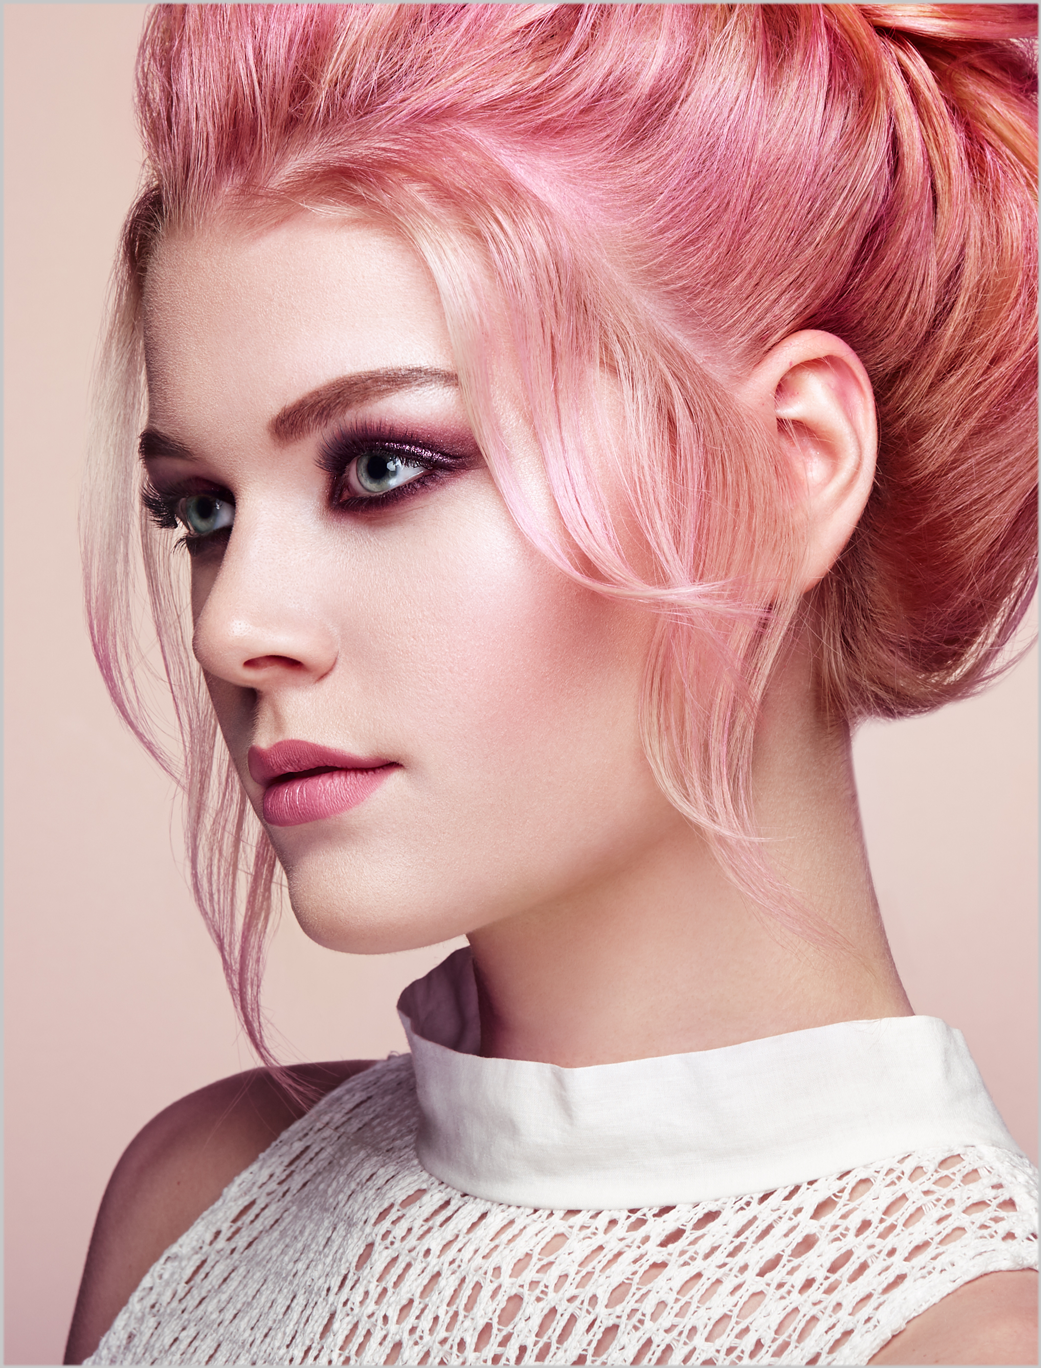 PINK IS THE NEW BLONDE. THE GLAMOUR OF PINK HAIR.